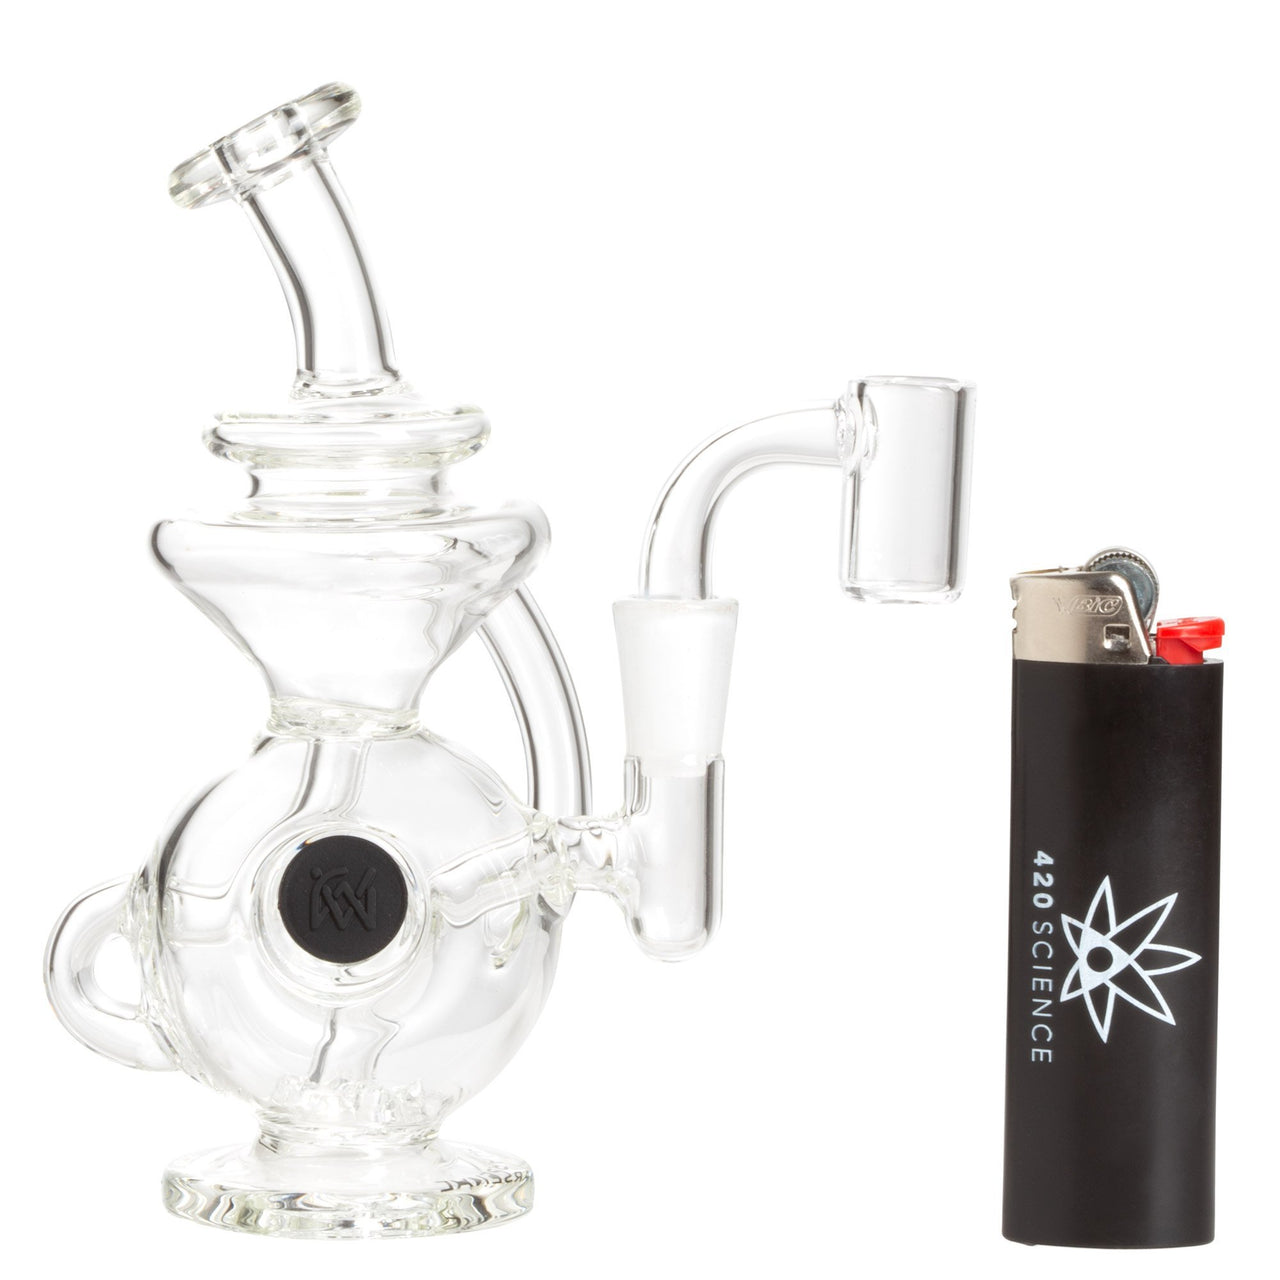 Mj Arsenal 'Mini Jig' Built-In-Container Mini Recycler Rig